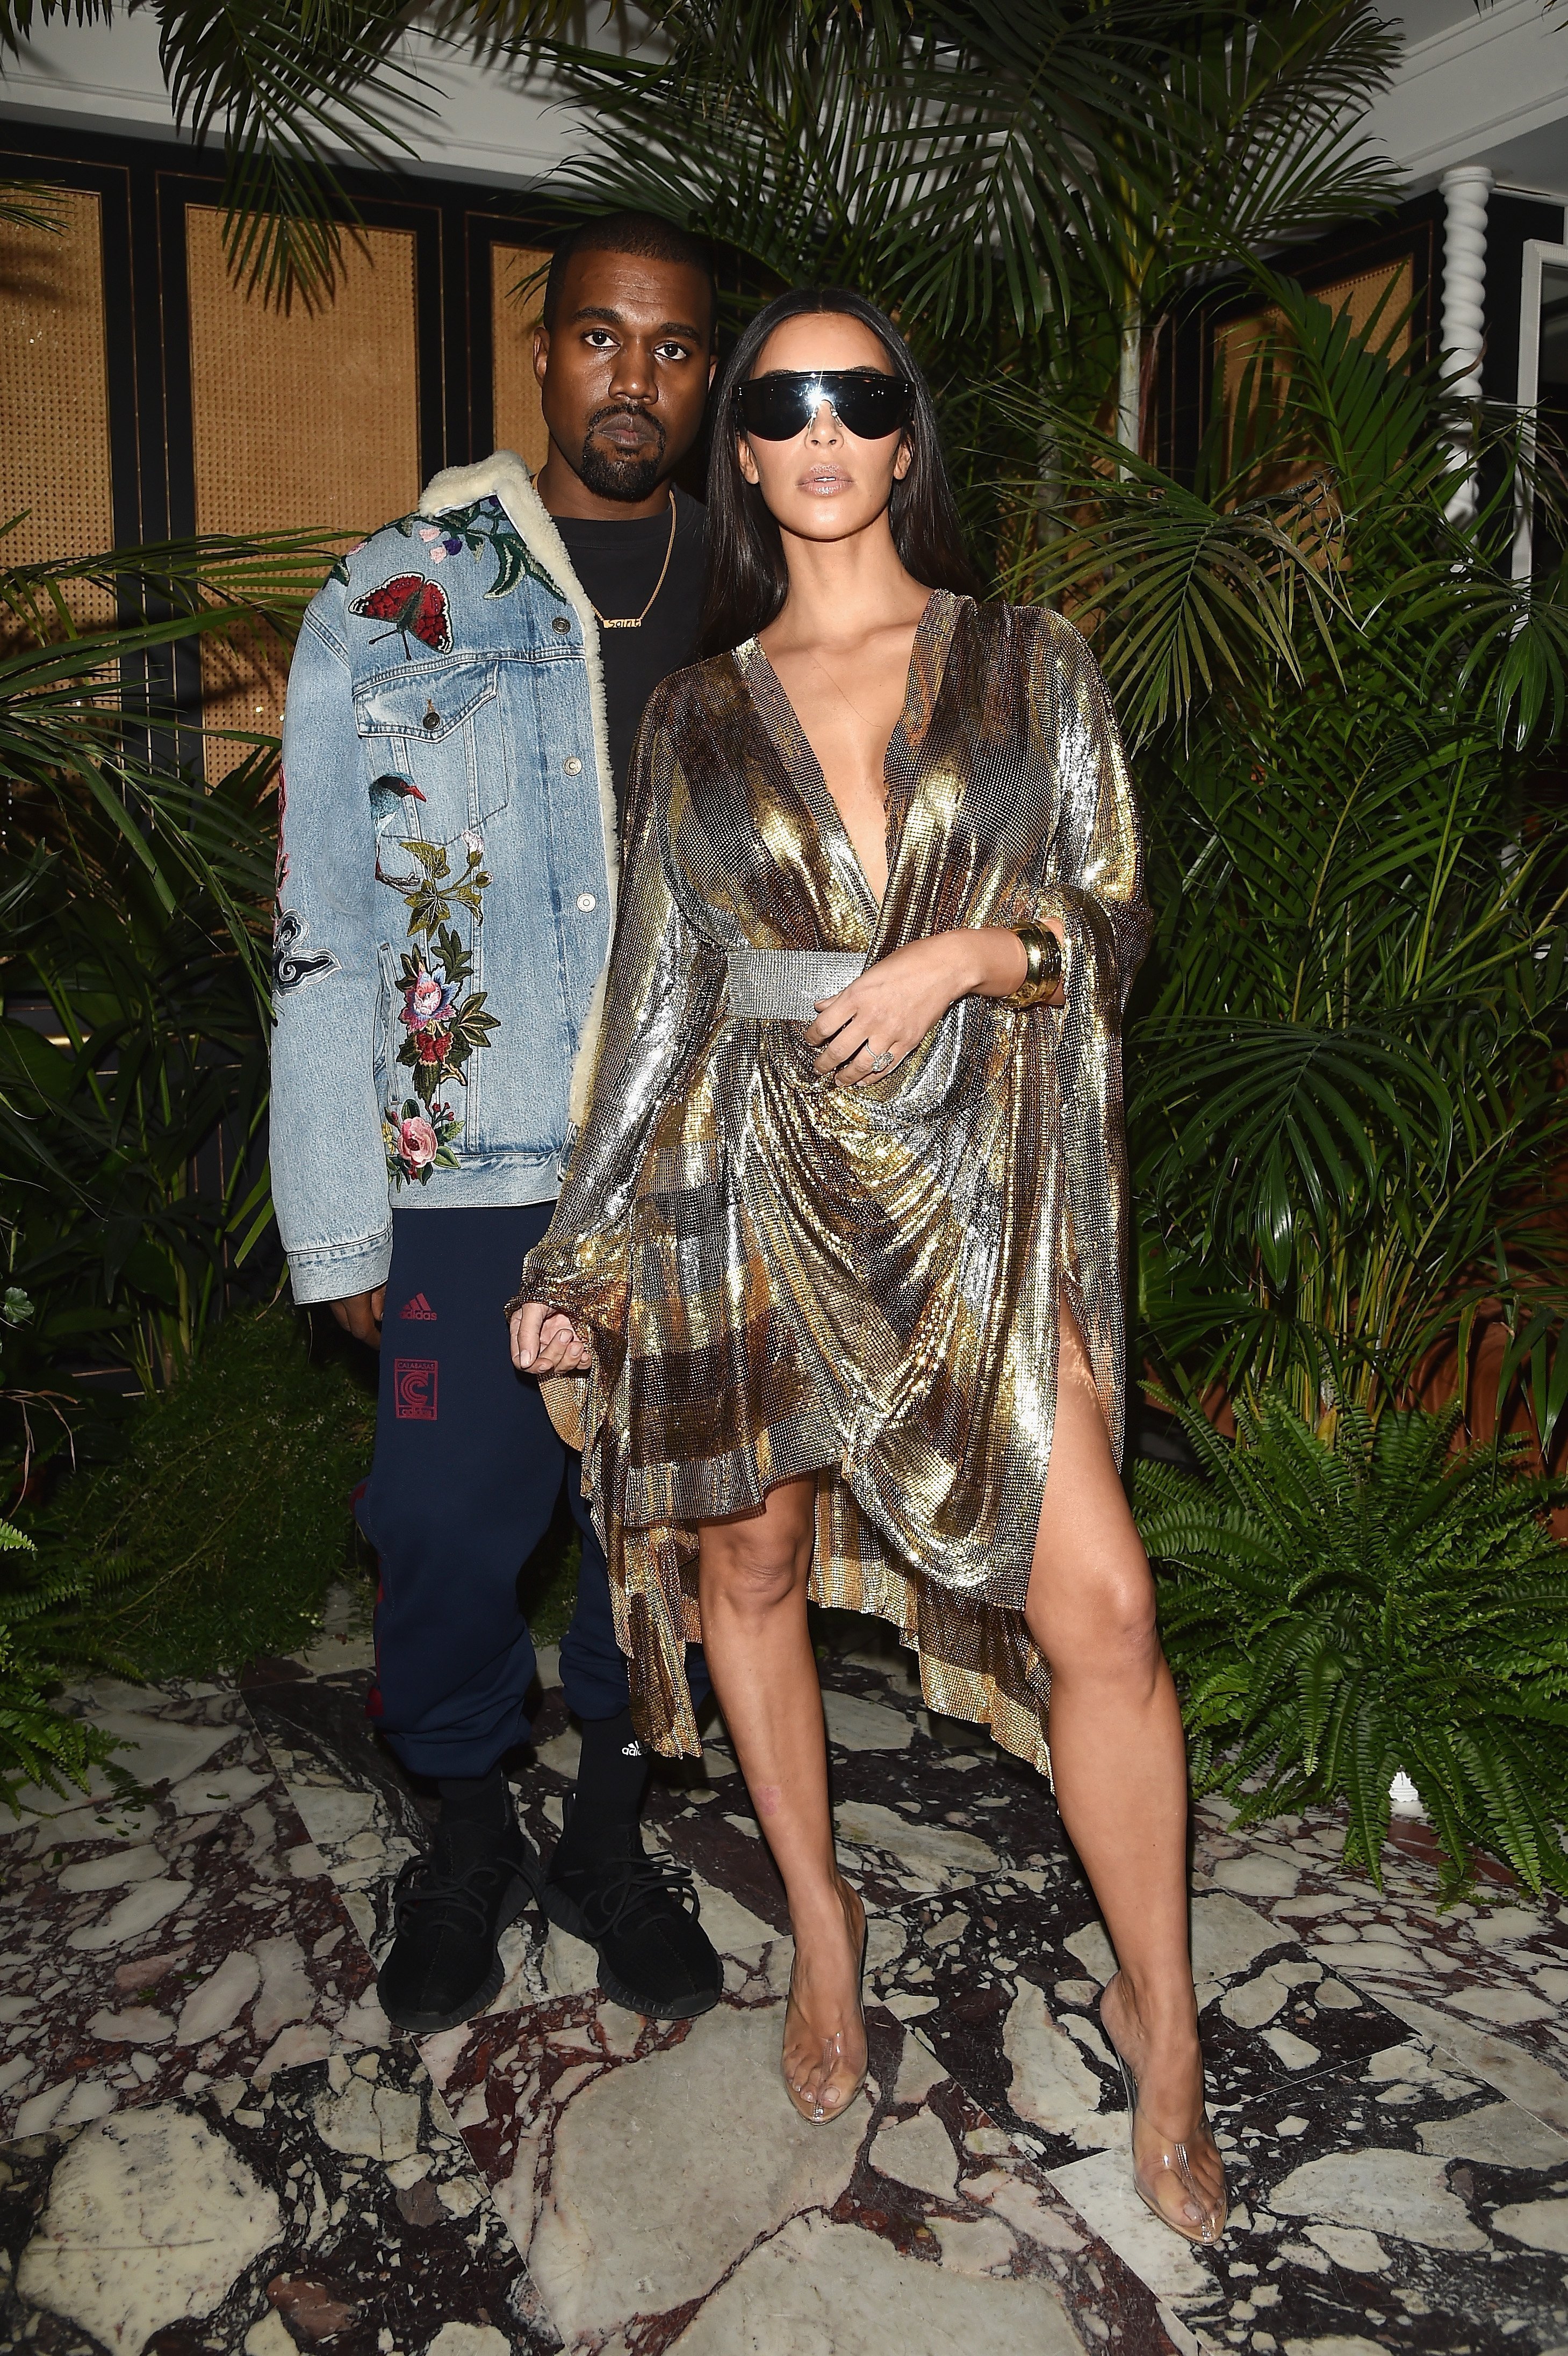 Kanye West & Kim Kardashian at the Balmain aftershow party as part of the Paris Fashion Week on Sept. 29, 2016 in Paris, France | Photo: Getty Images